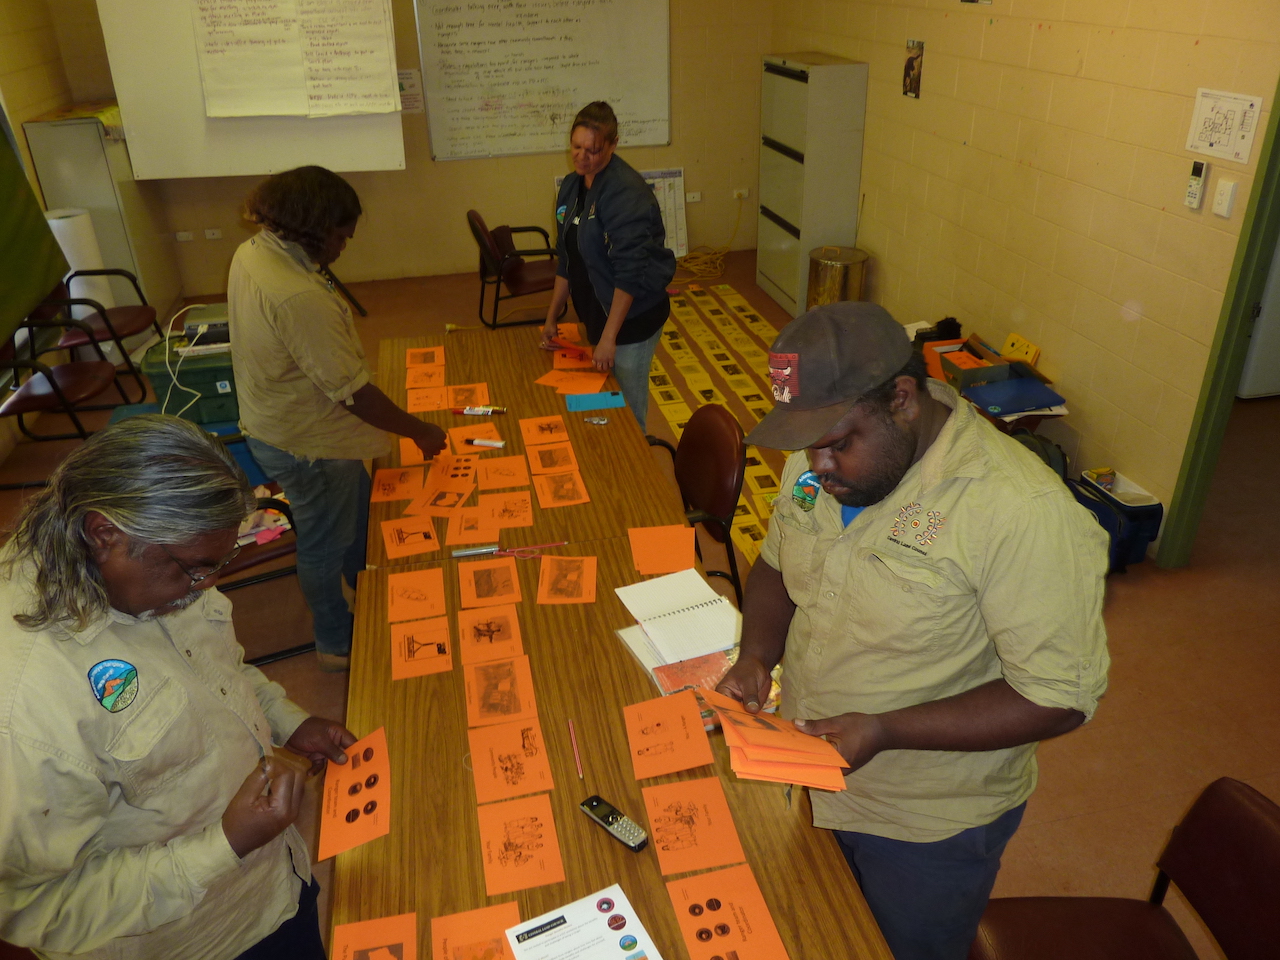 Arltarpilta Inelye (Atitjere, Harts Range) rangers prioritise the jobs they think are most important to do (yellow cards) then prioritise who they do these jobs for (orange cards) in 2017.